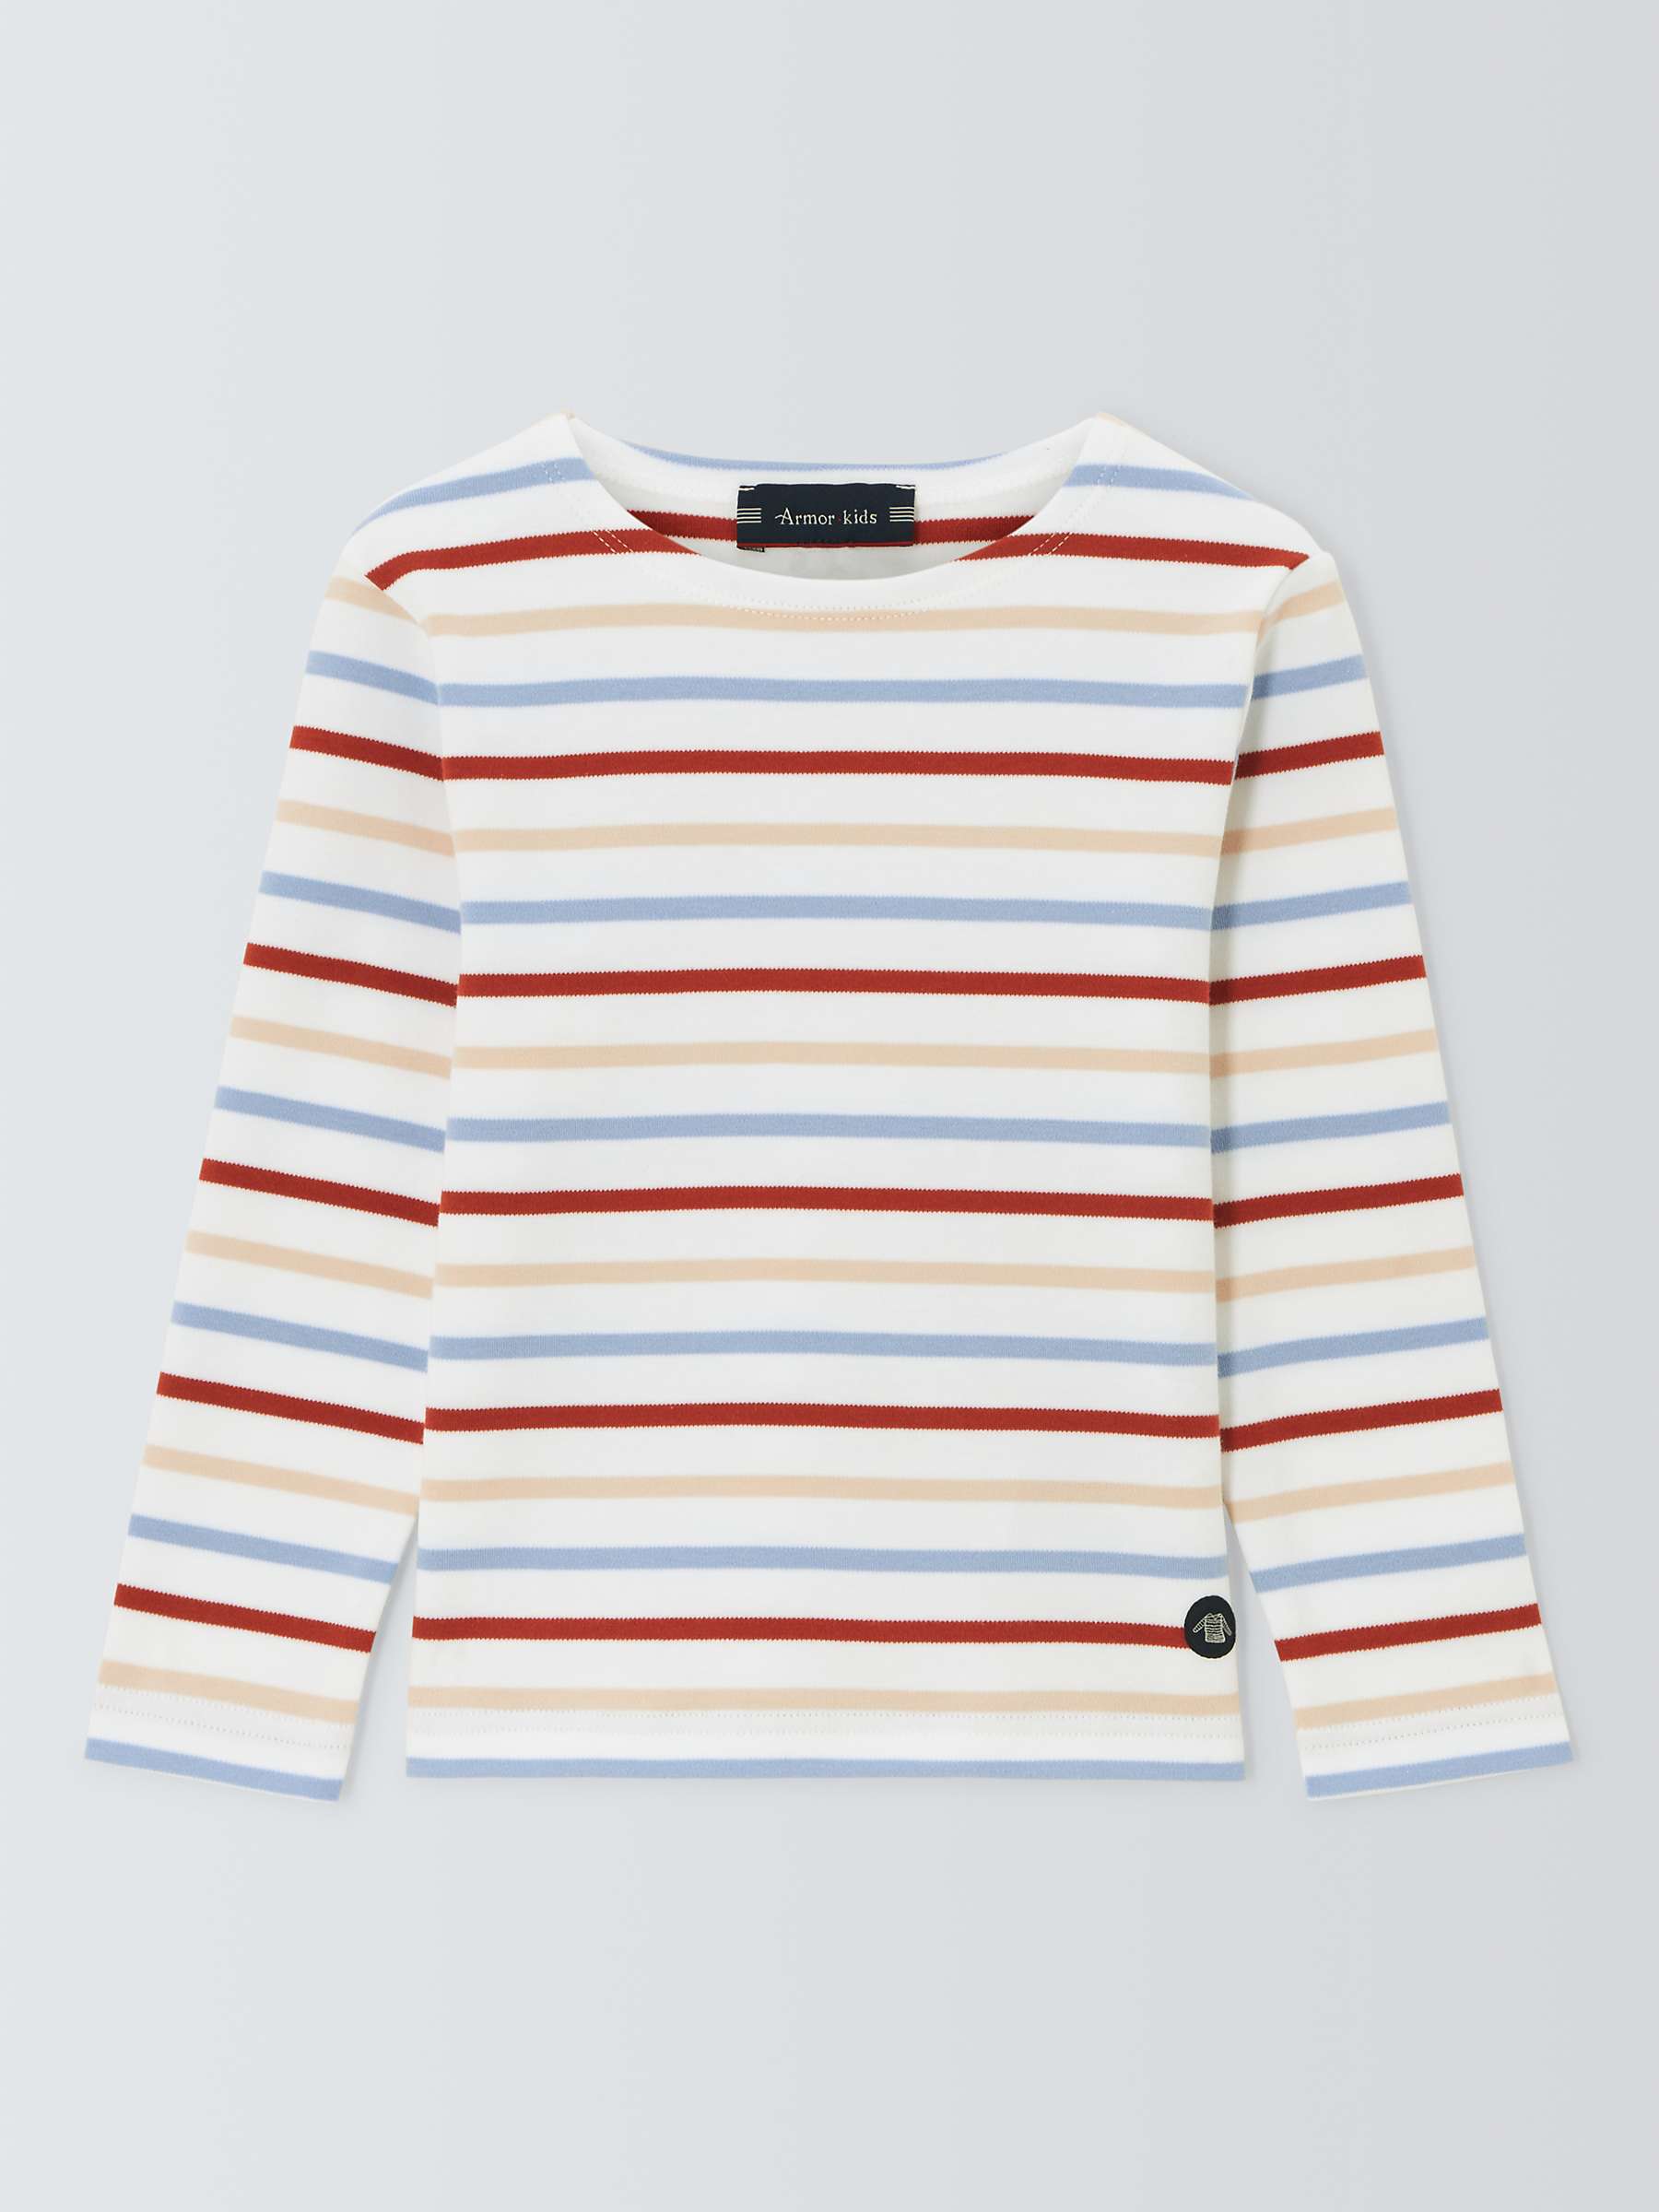 Buy Armor Lux Kids' Stripe Long Sleeve T-Shirt, Blanc/Marmo/Ketchup Online at johnlewis.com